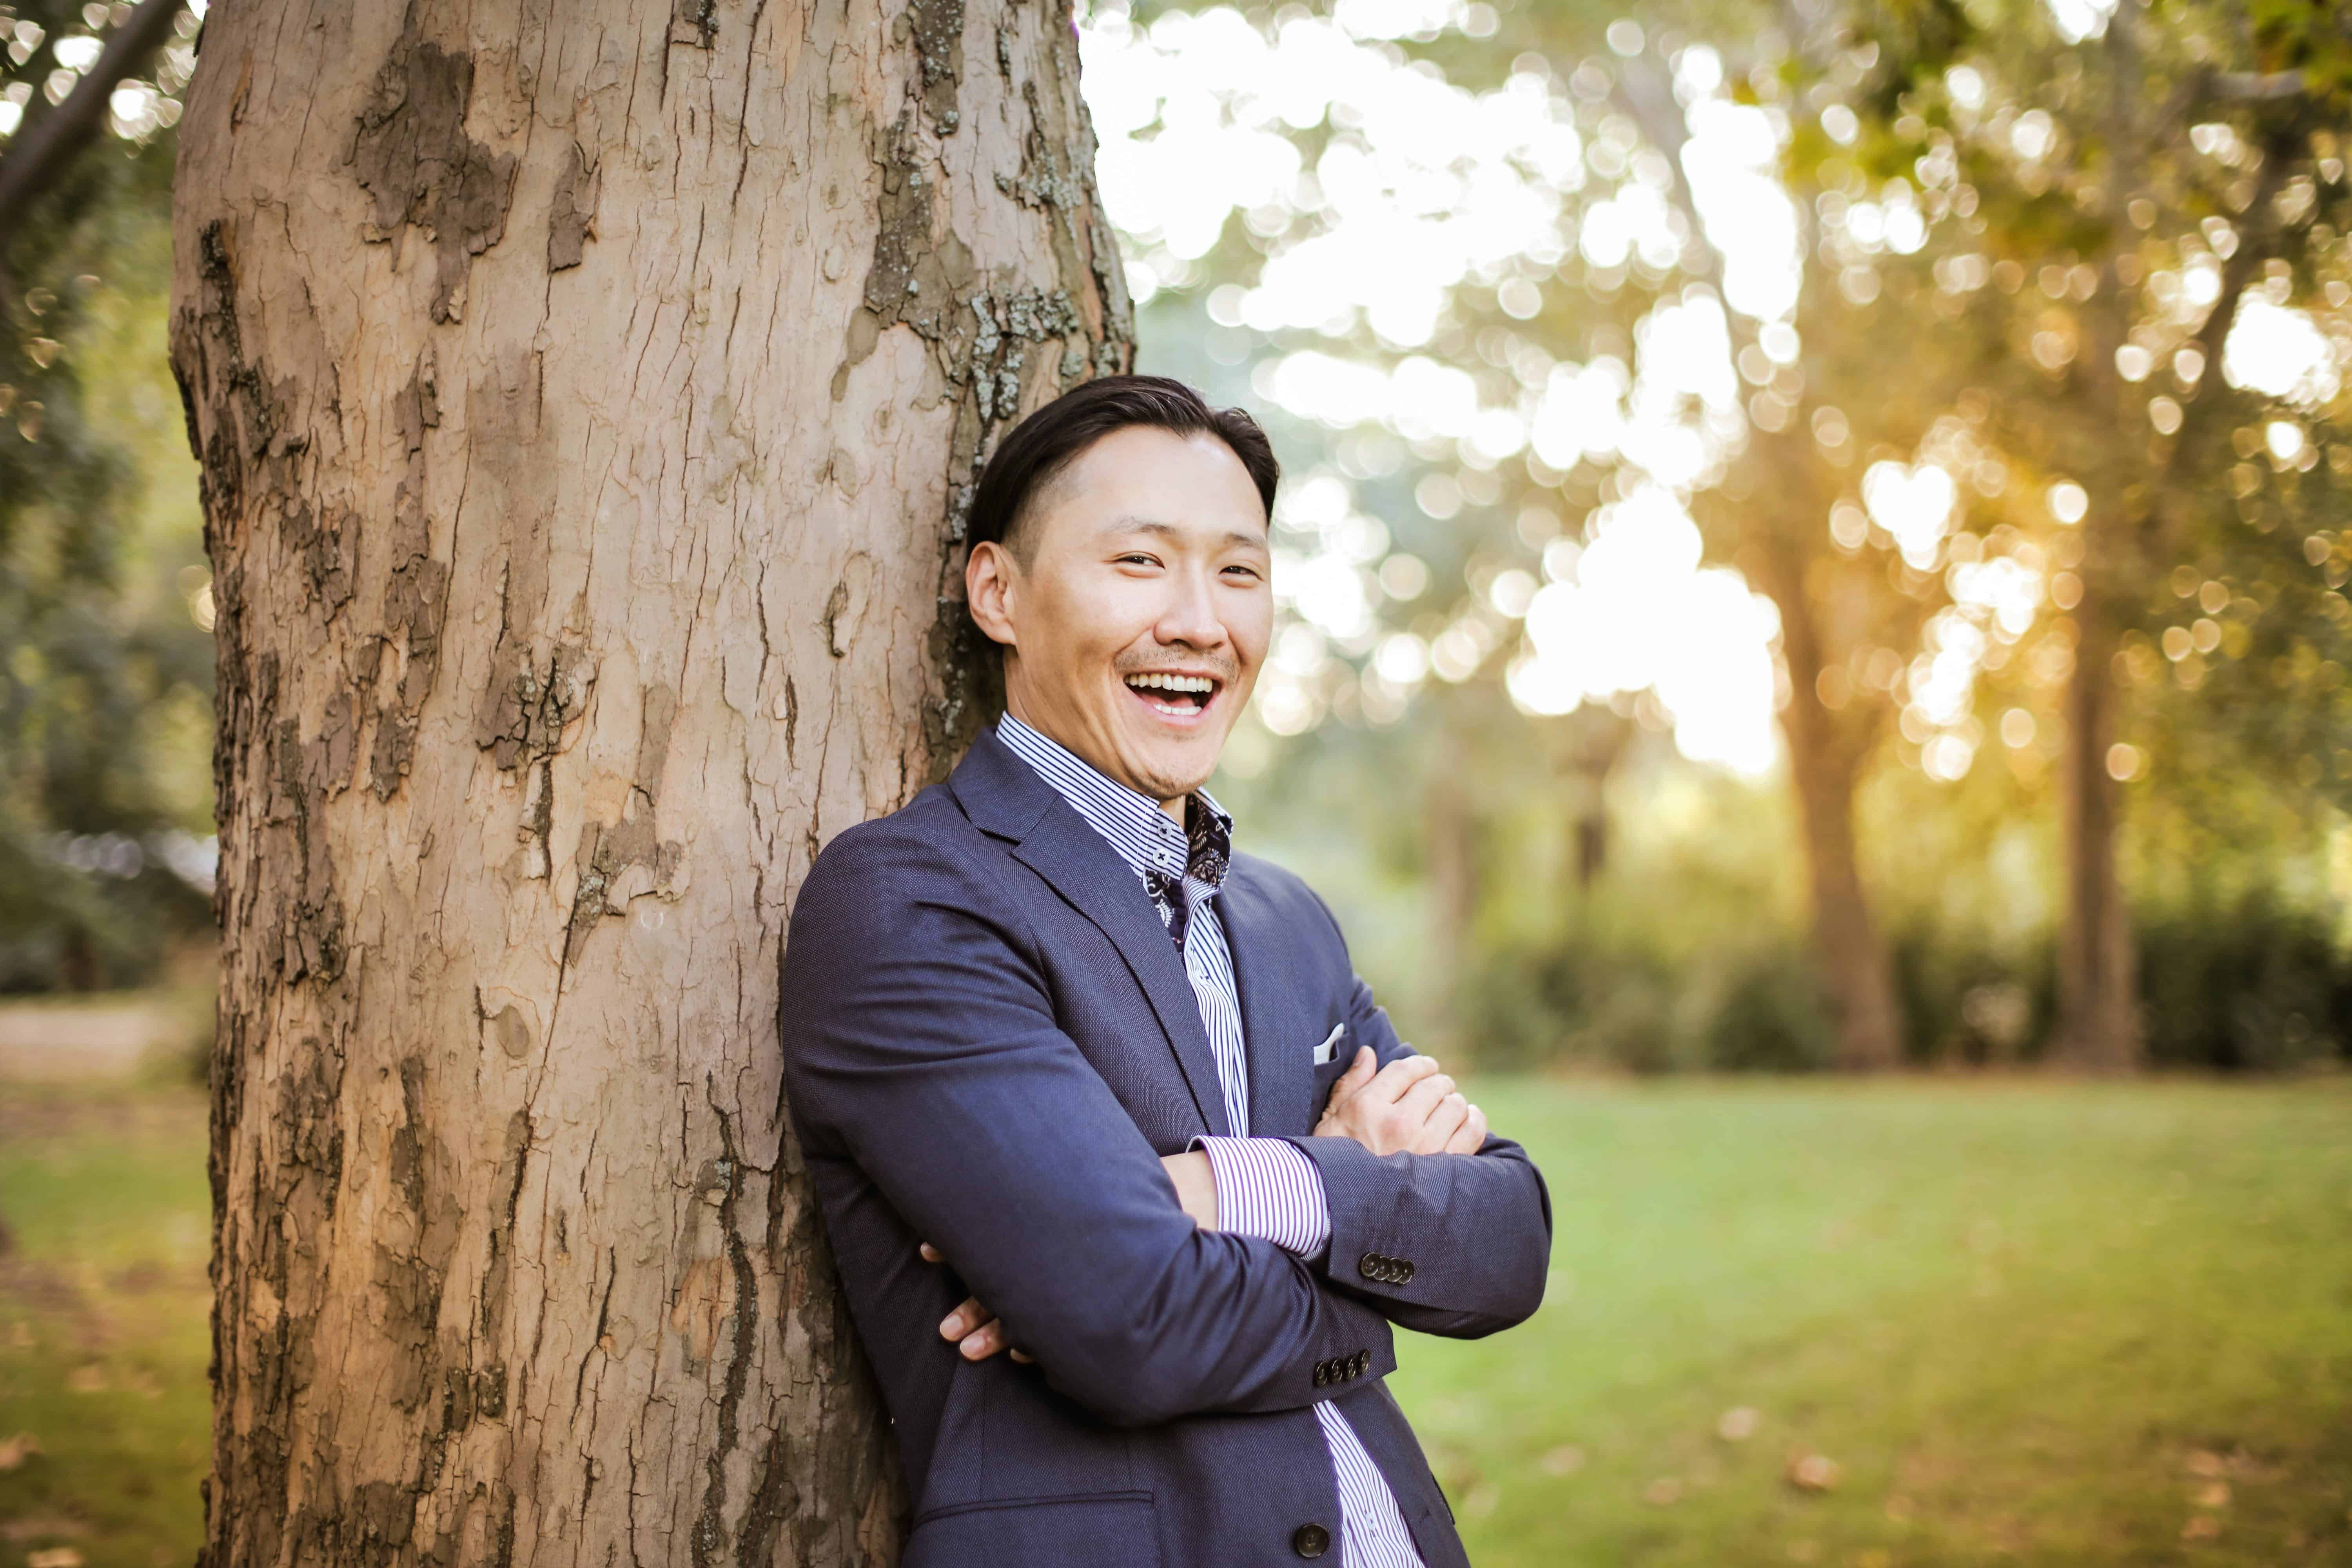 A man wearing a suit standing by a tree and smiling